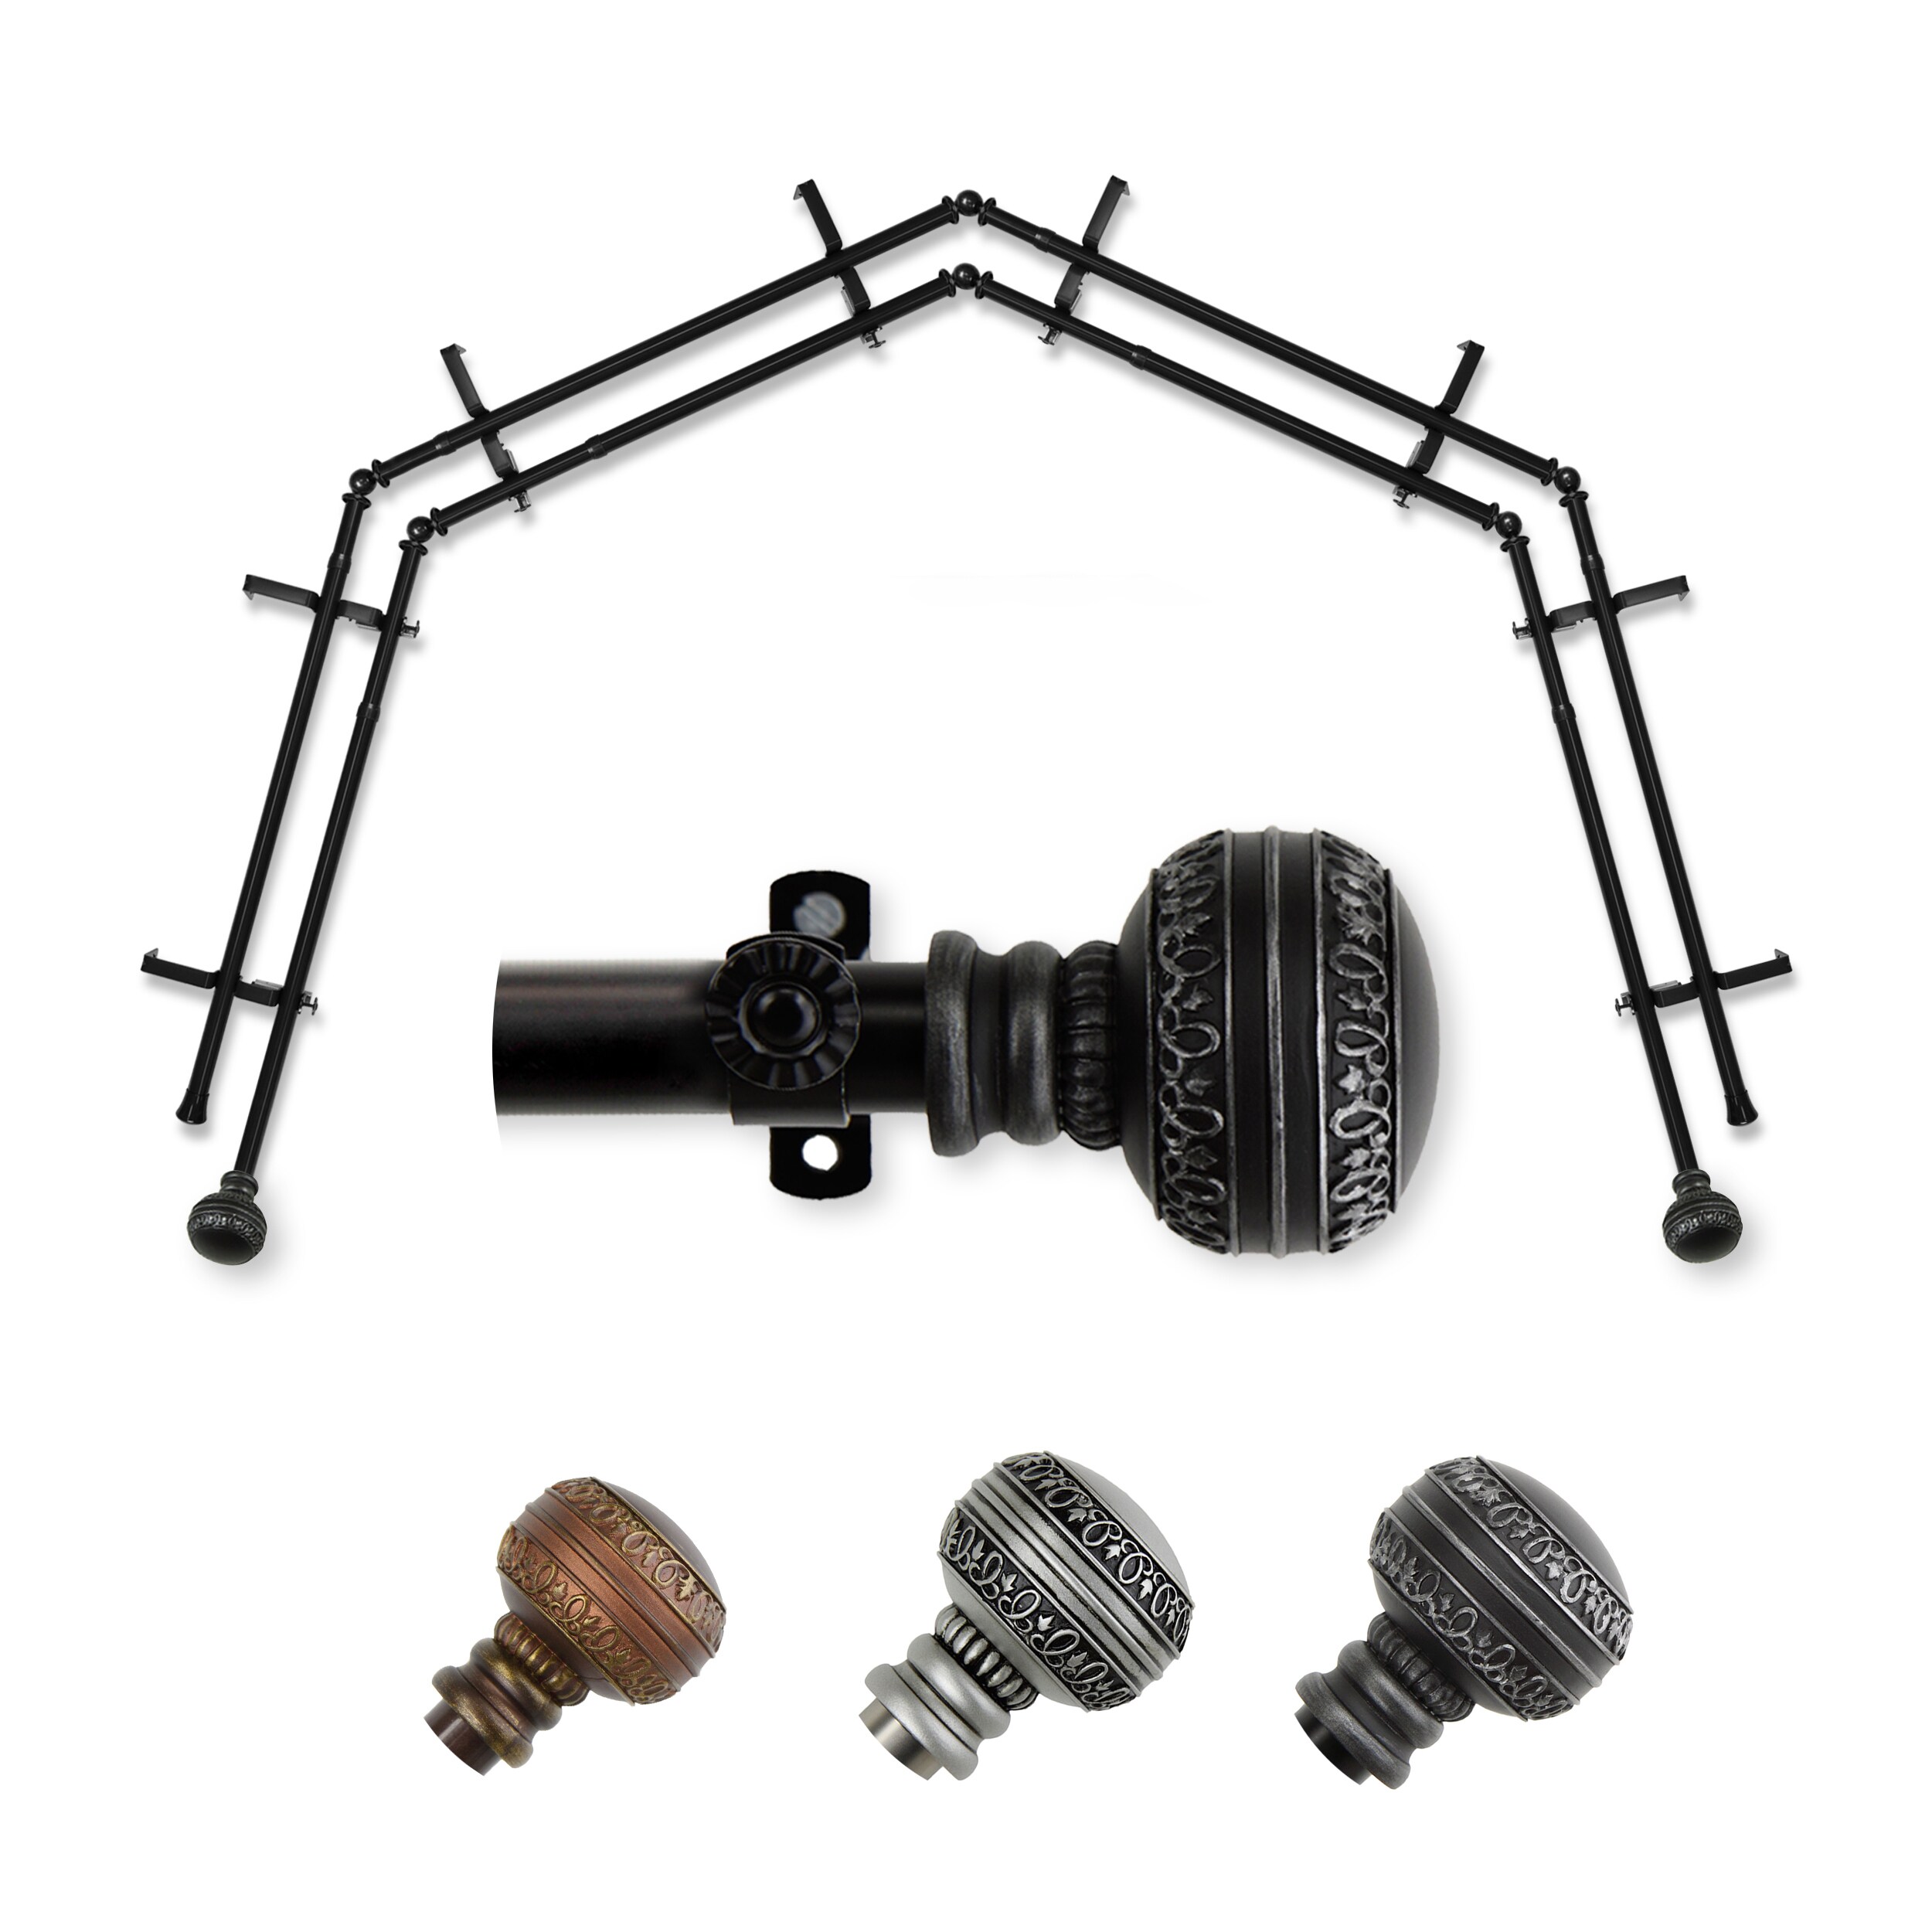 Faith 4-Sided Double Bay Curtain Rods at Lowes.com